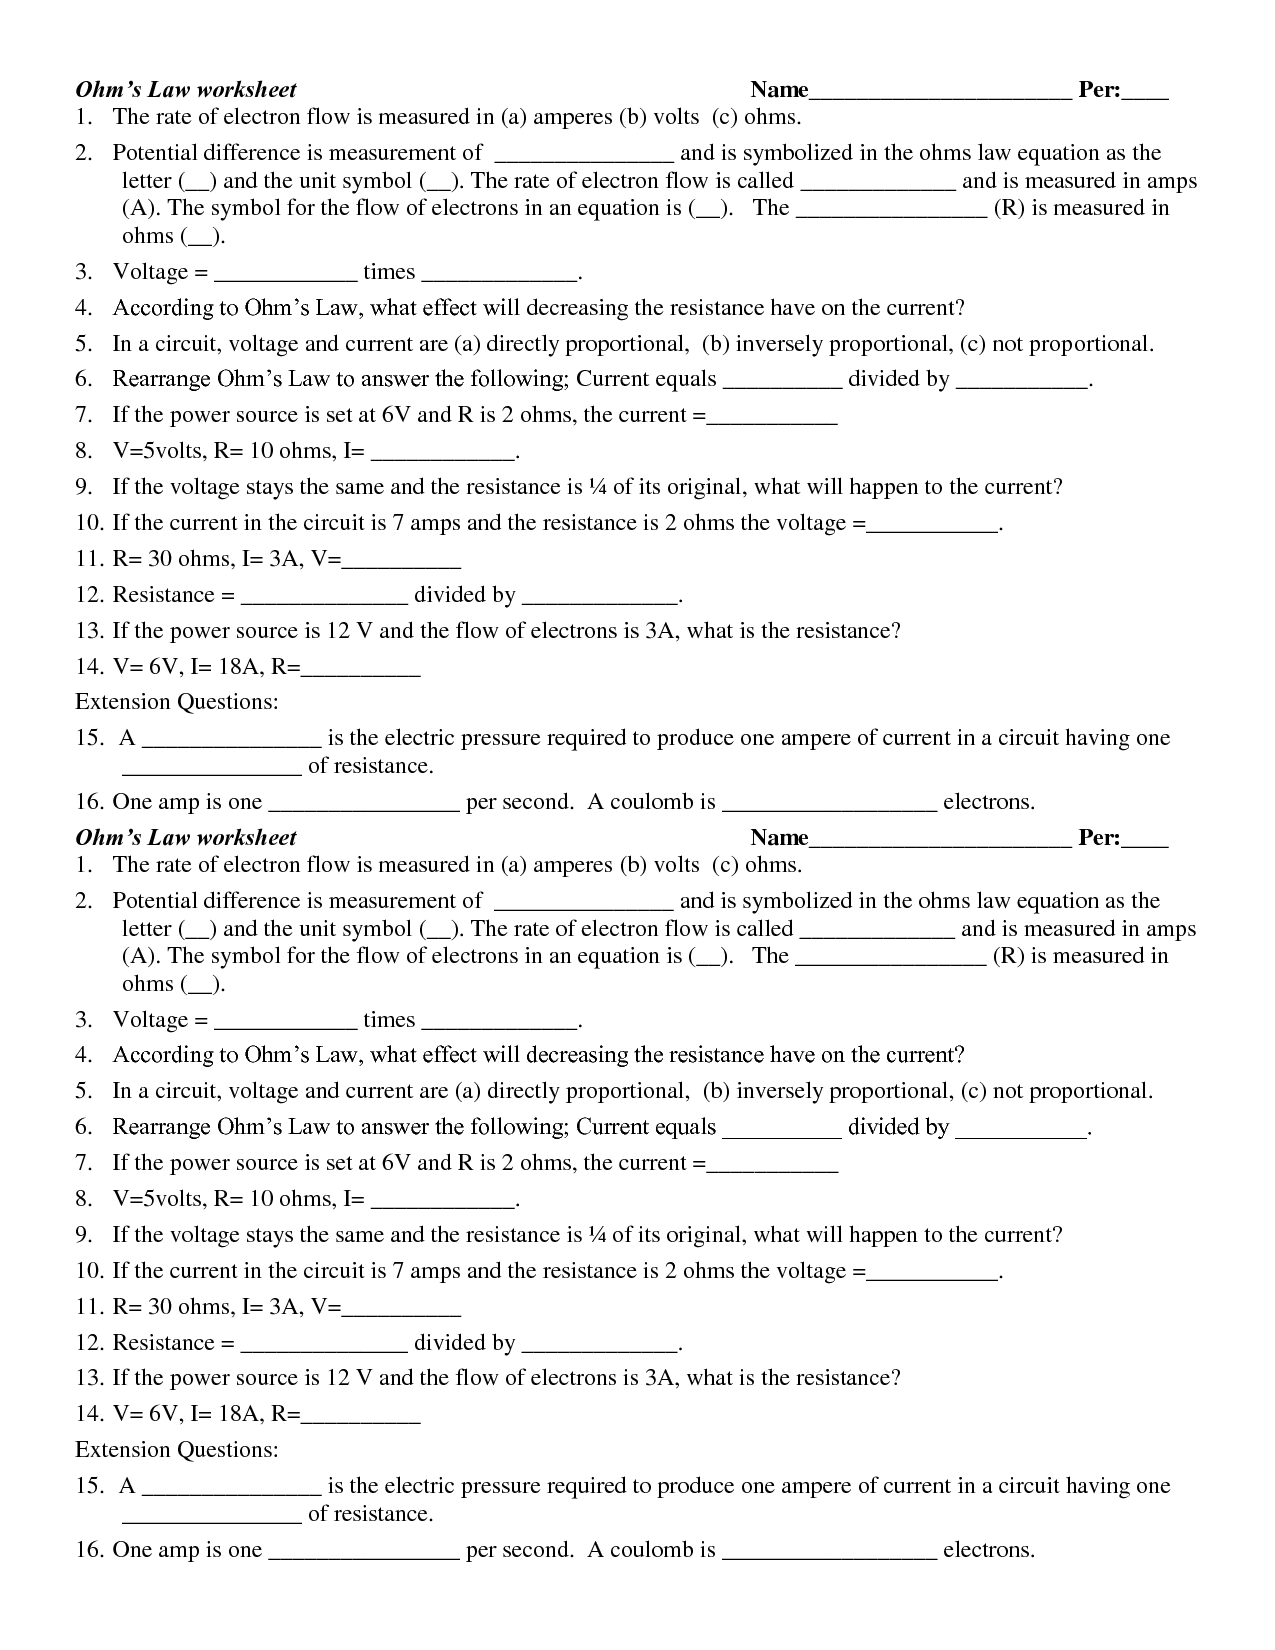 Ohm Law Worksheet With Answers